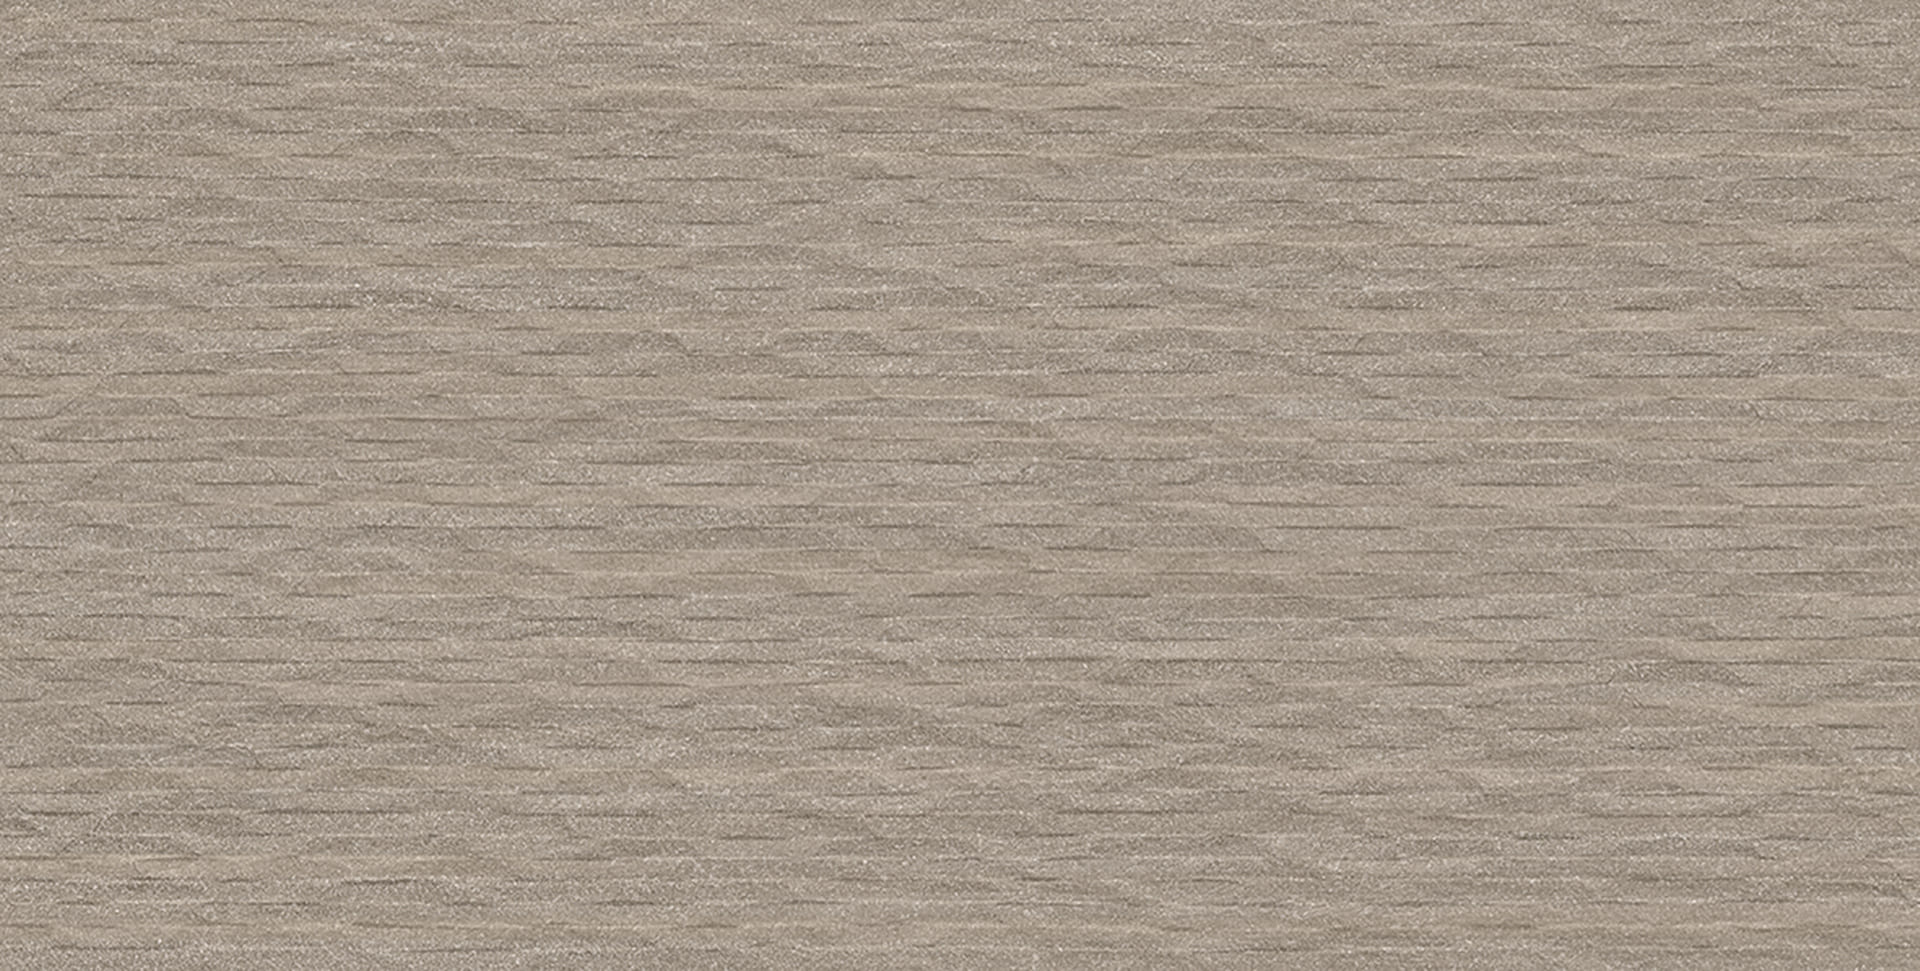 Elegance Pro: Mural Taupe Wall Tile (24"x48"x9.5-mm | matte)